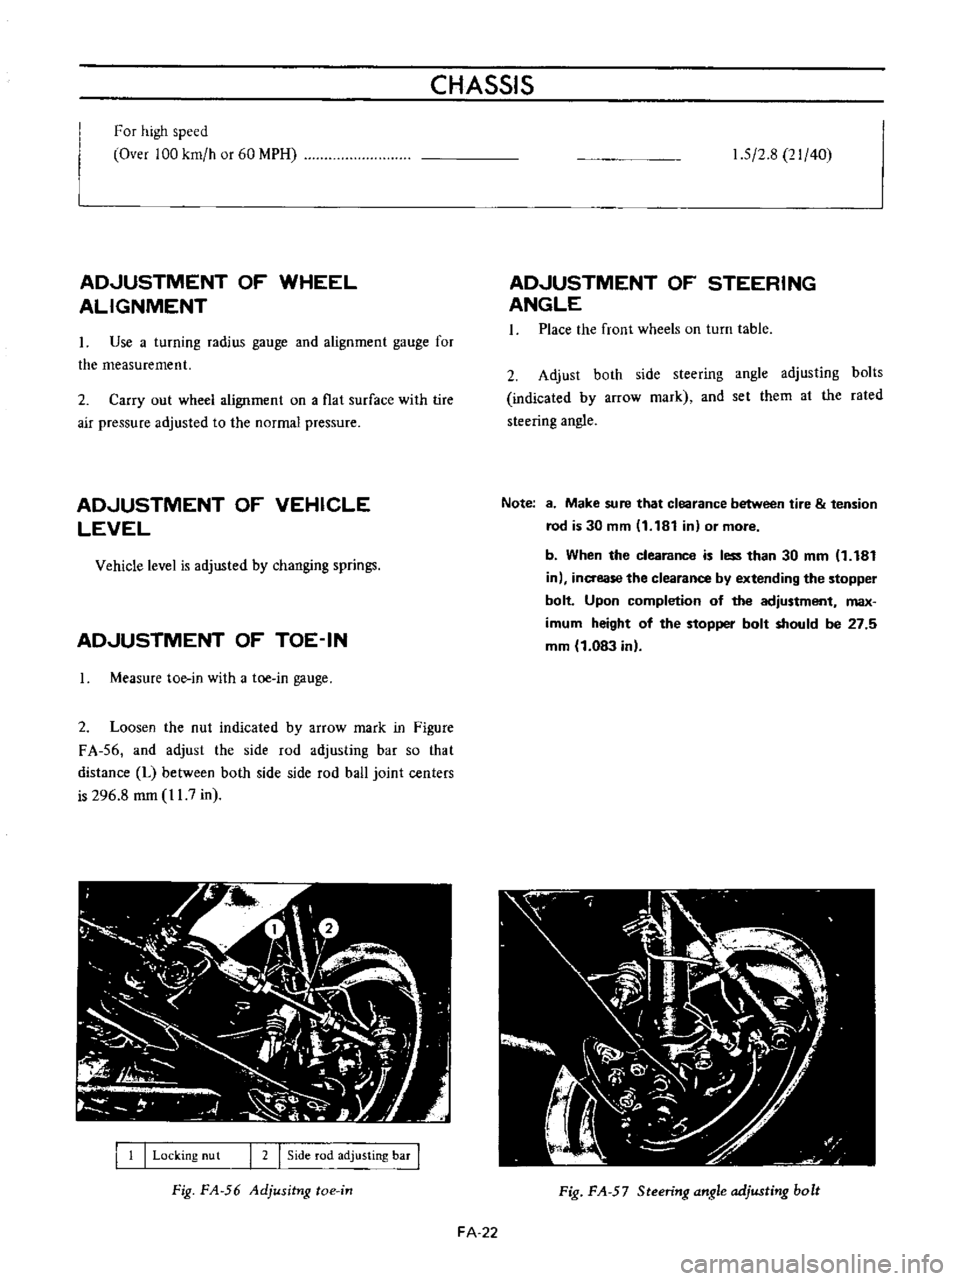 DATSUN B110 1973  Service Repair Manual 
CHASSIS

For

high 
speed

Over 
100 
km 
h 
or 
60 
MPH

ADJUSTMENT 
OF 
WHEEL

ALIGNMENT

Use 
a

turning 
radius

gauge 
and

alignment 
gauge 
for

the

measurement

2

Carry 
out 
wheel

alignme